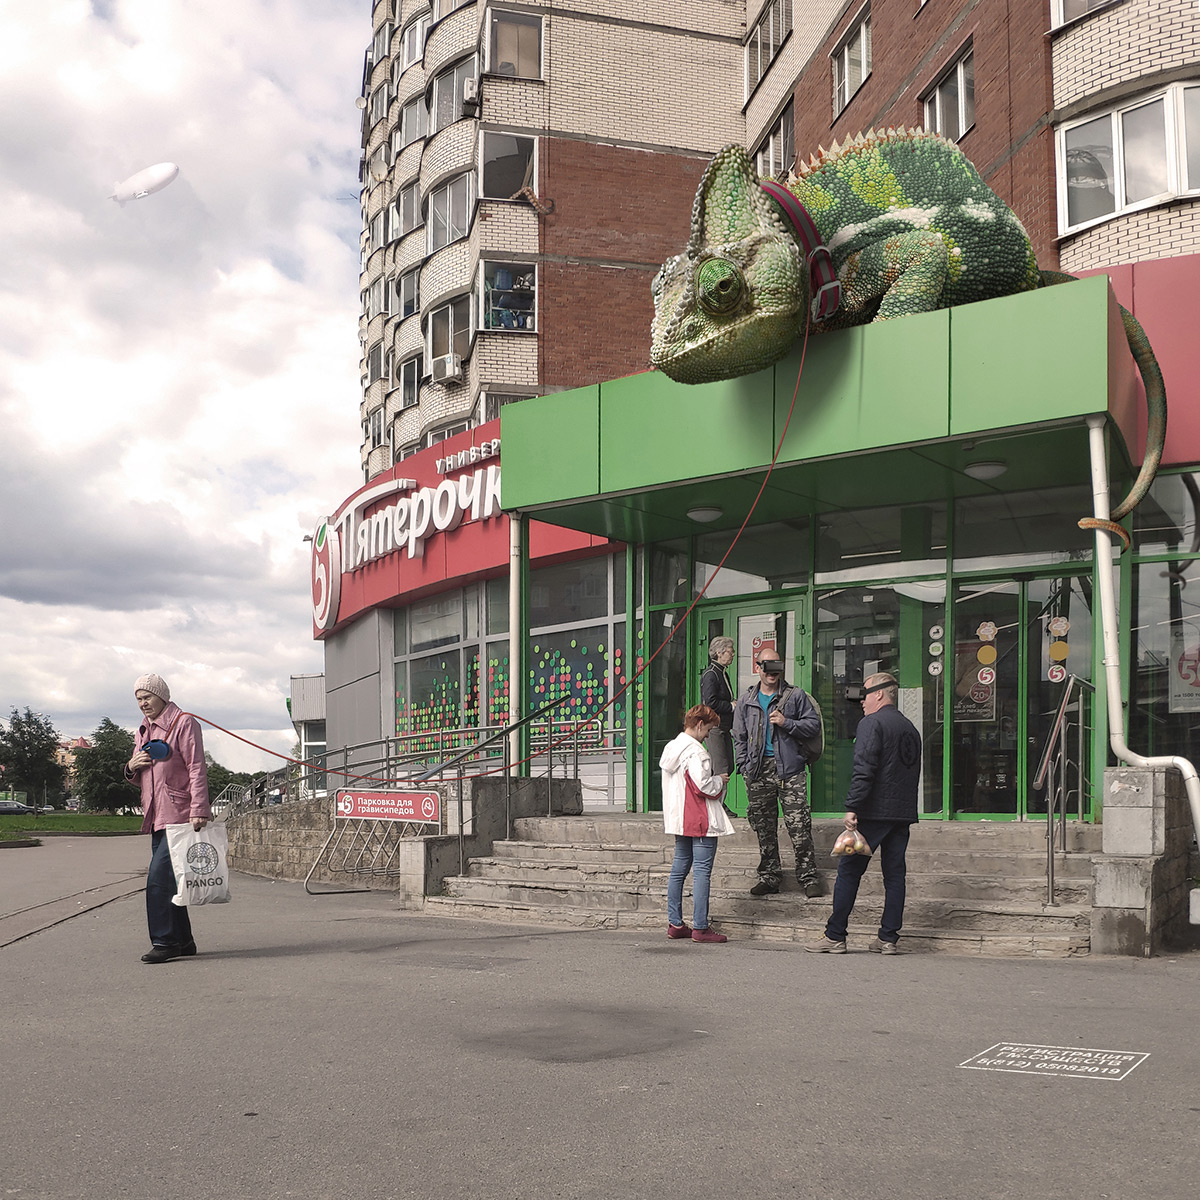 Incredible Compositions Of Giant Animals In Russian Urban Spaces By Vadim Solovyov 9